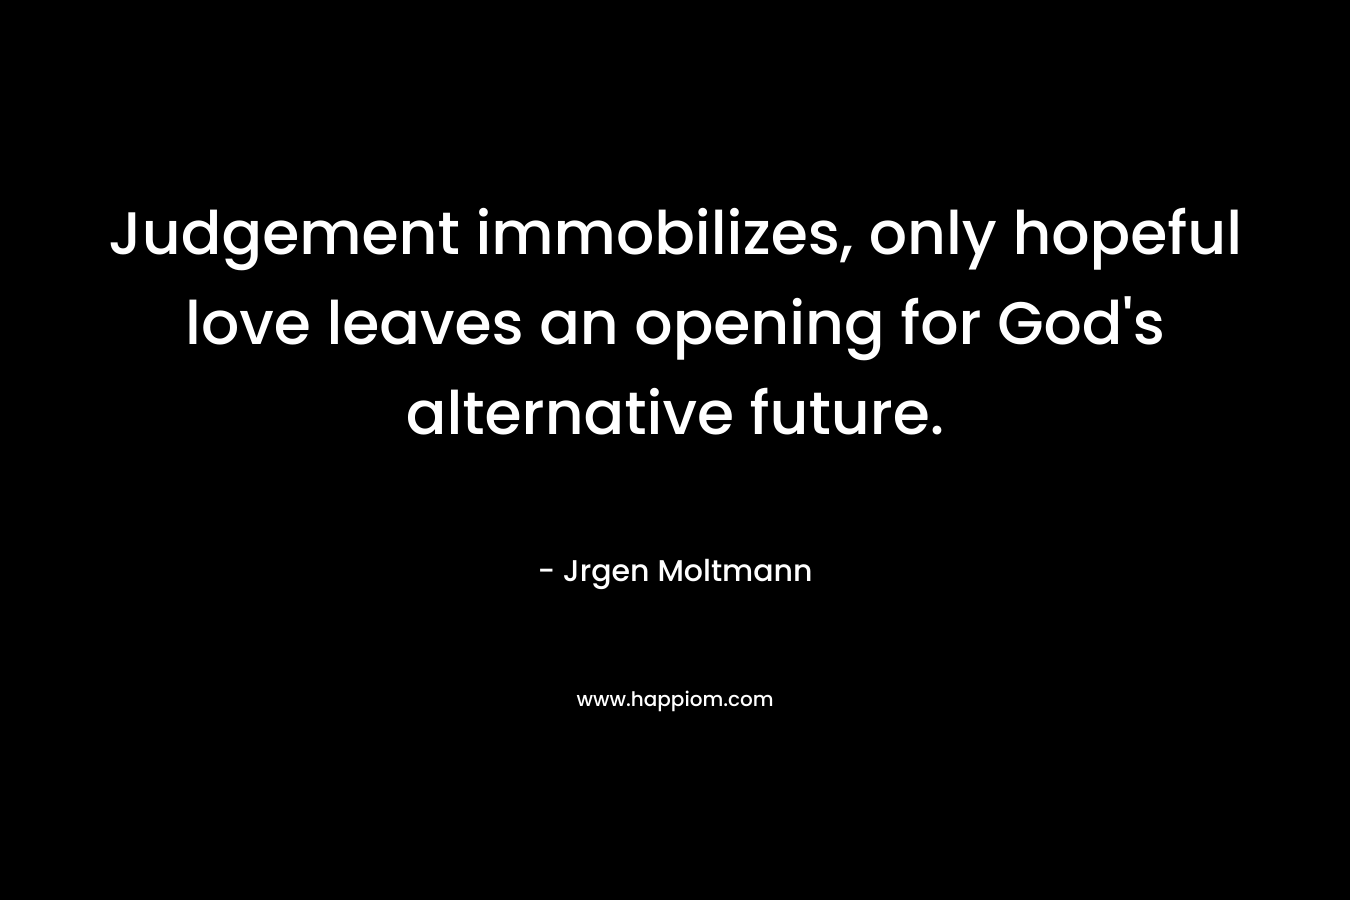 Judgement immobilizes, only hopeful love leaves an opening for God’s alternative future. – Jrgen Moltmann